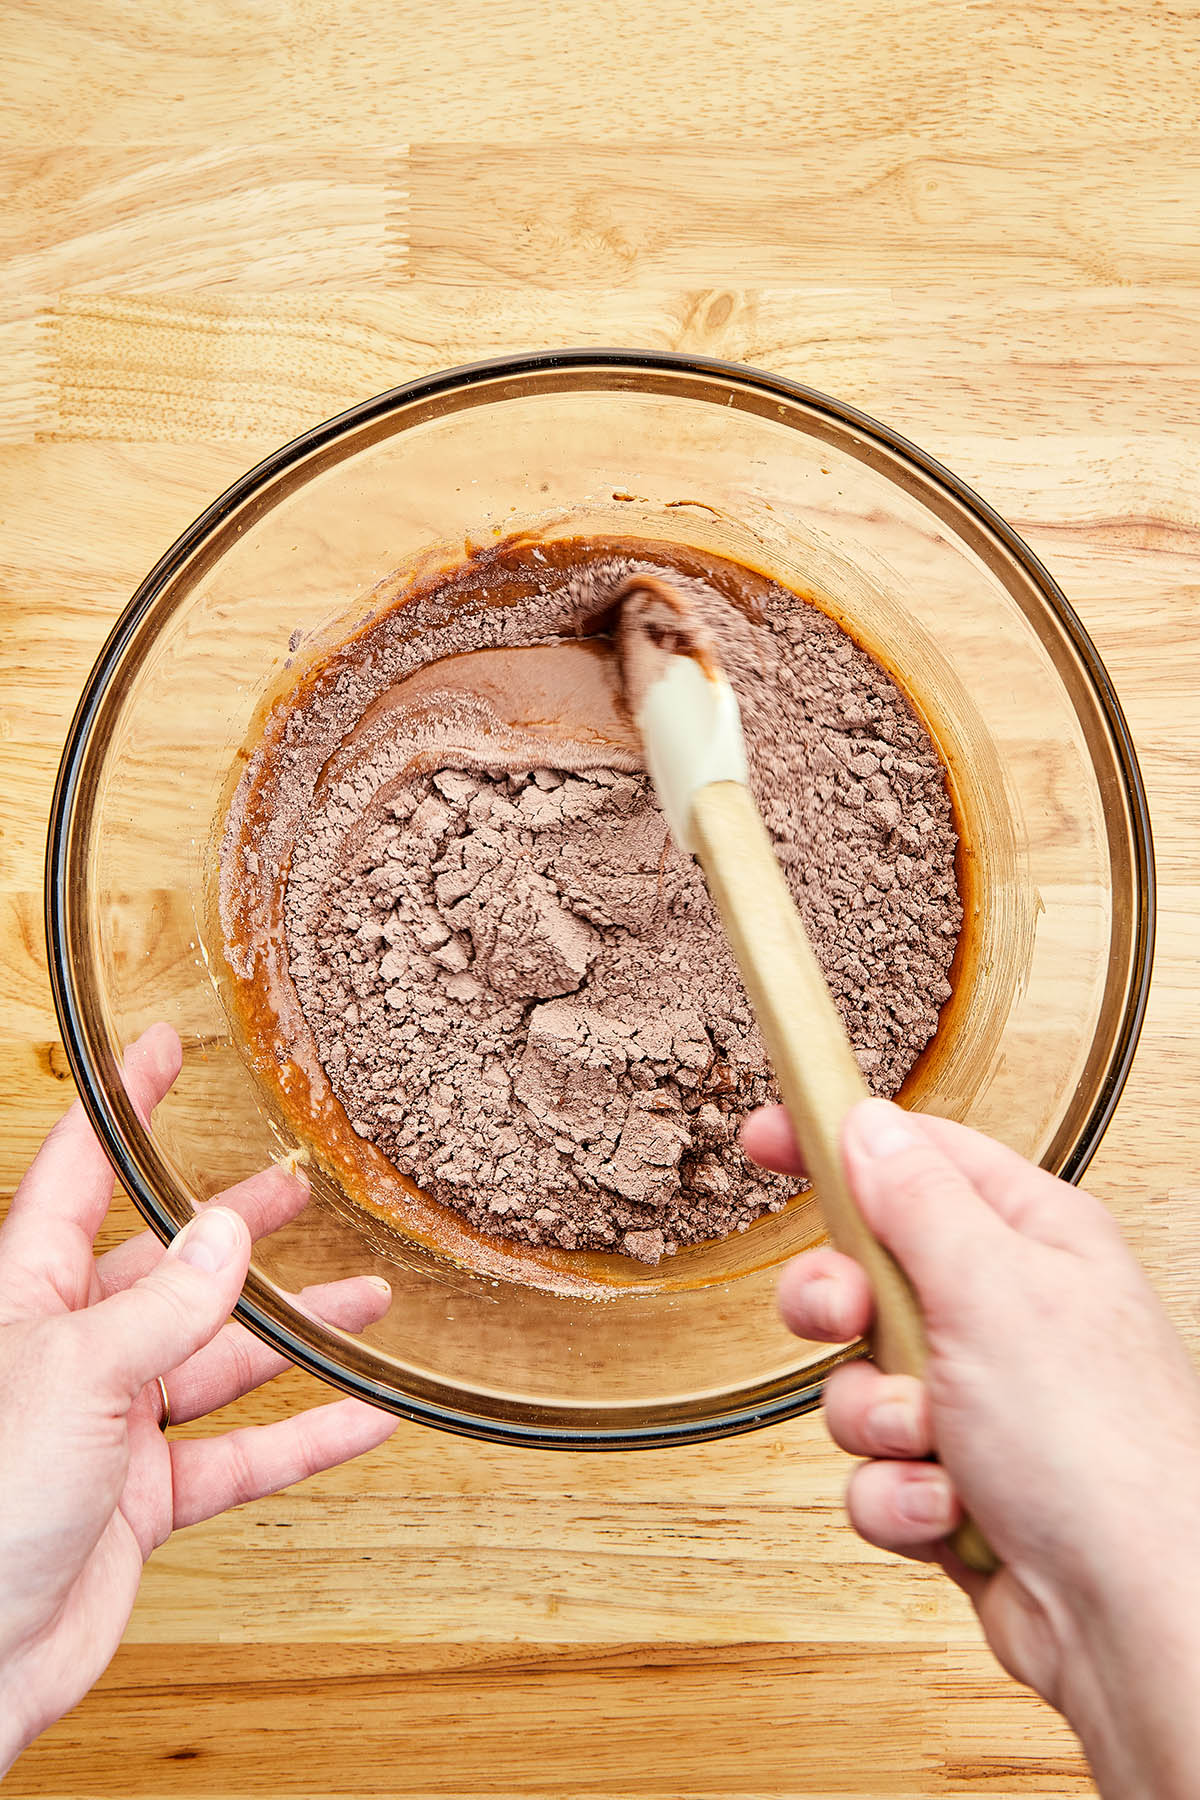 A hand using a rubber spatula to mix flour into chocolate.